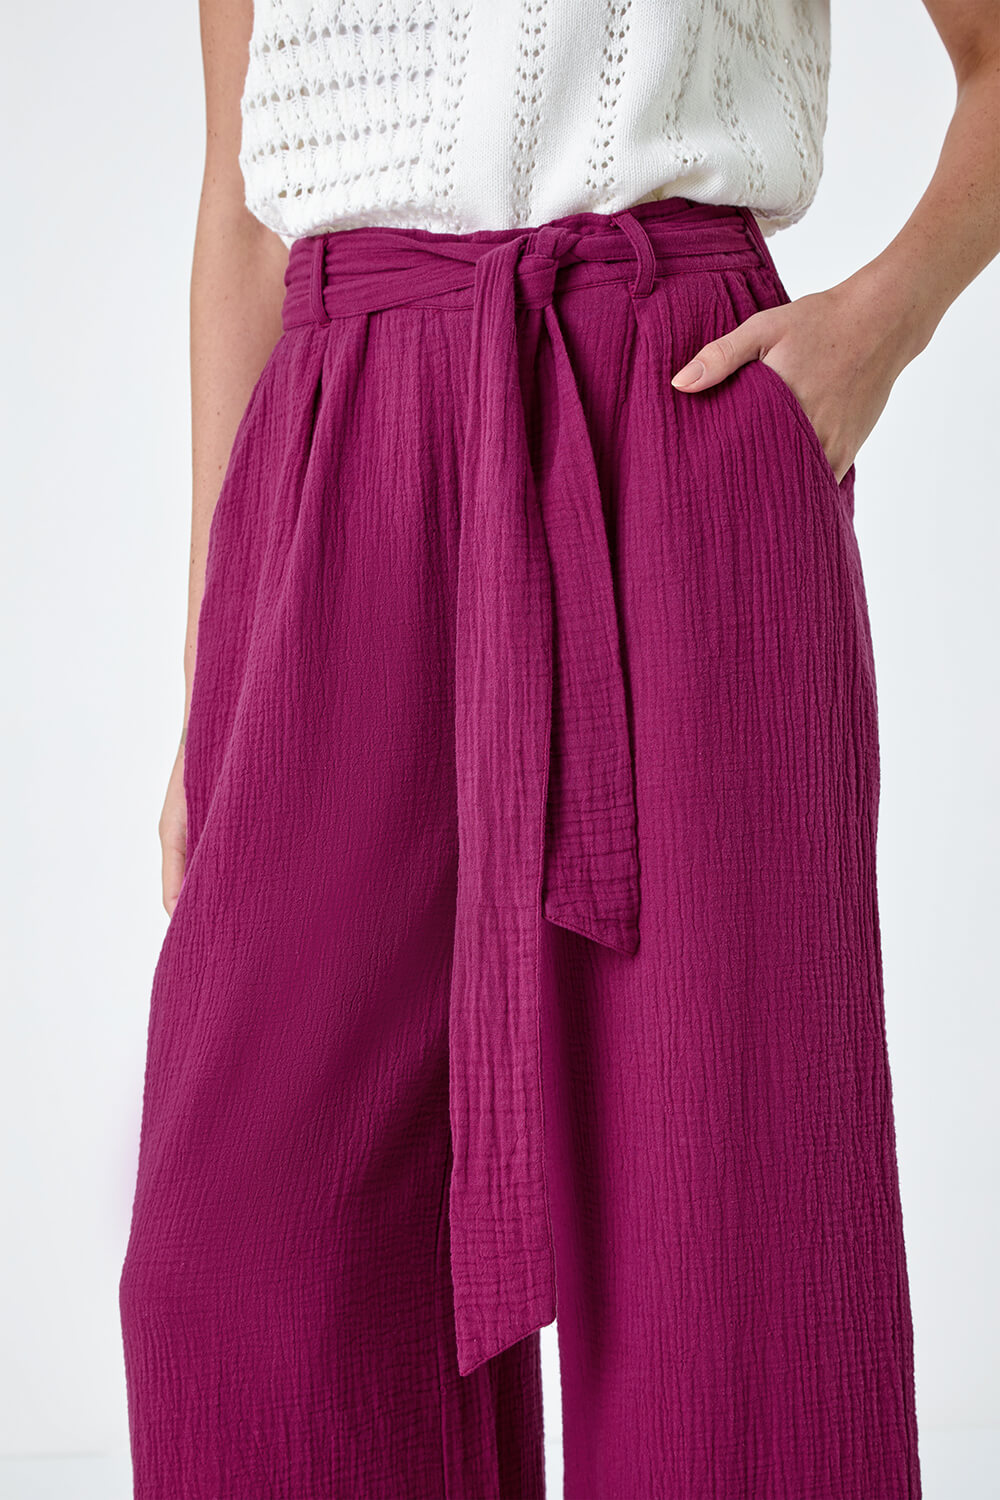 MAGENTA Textured Cotton Wide Leg Trousers, Image 5 of 5